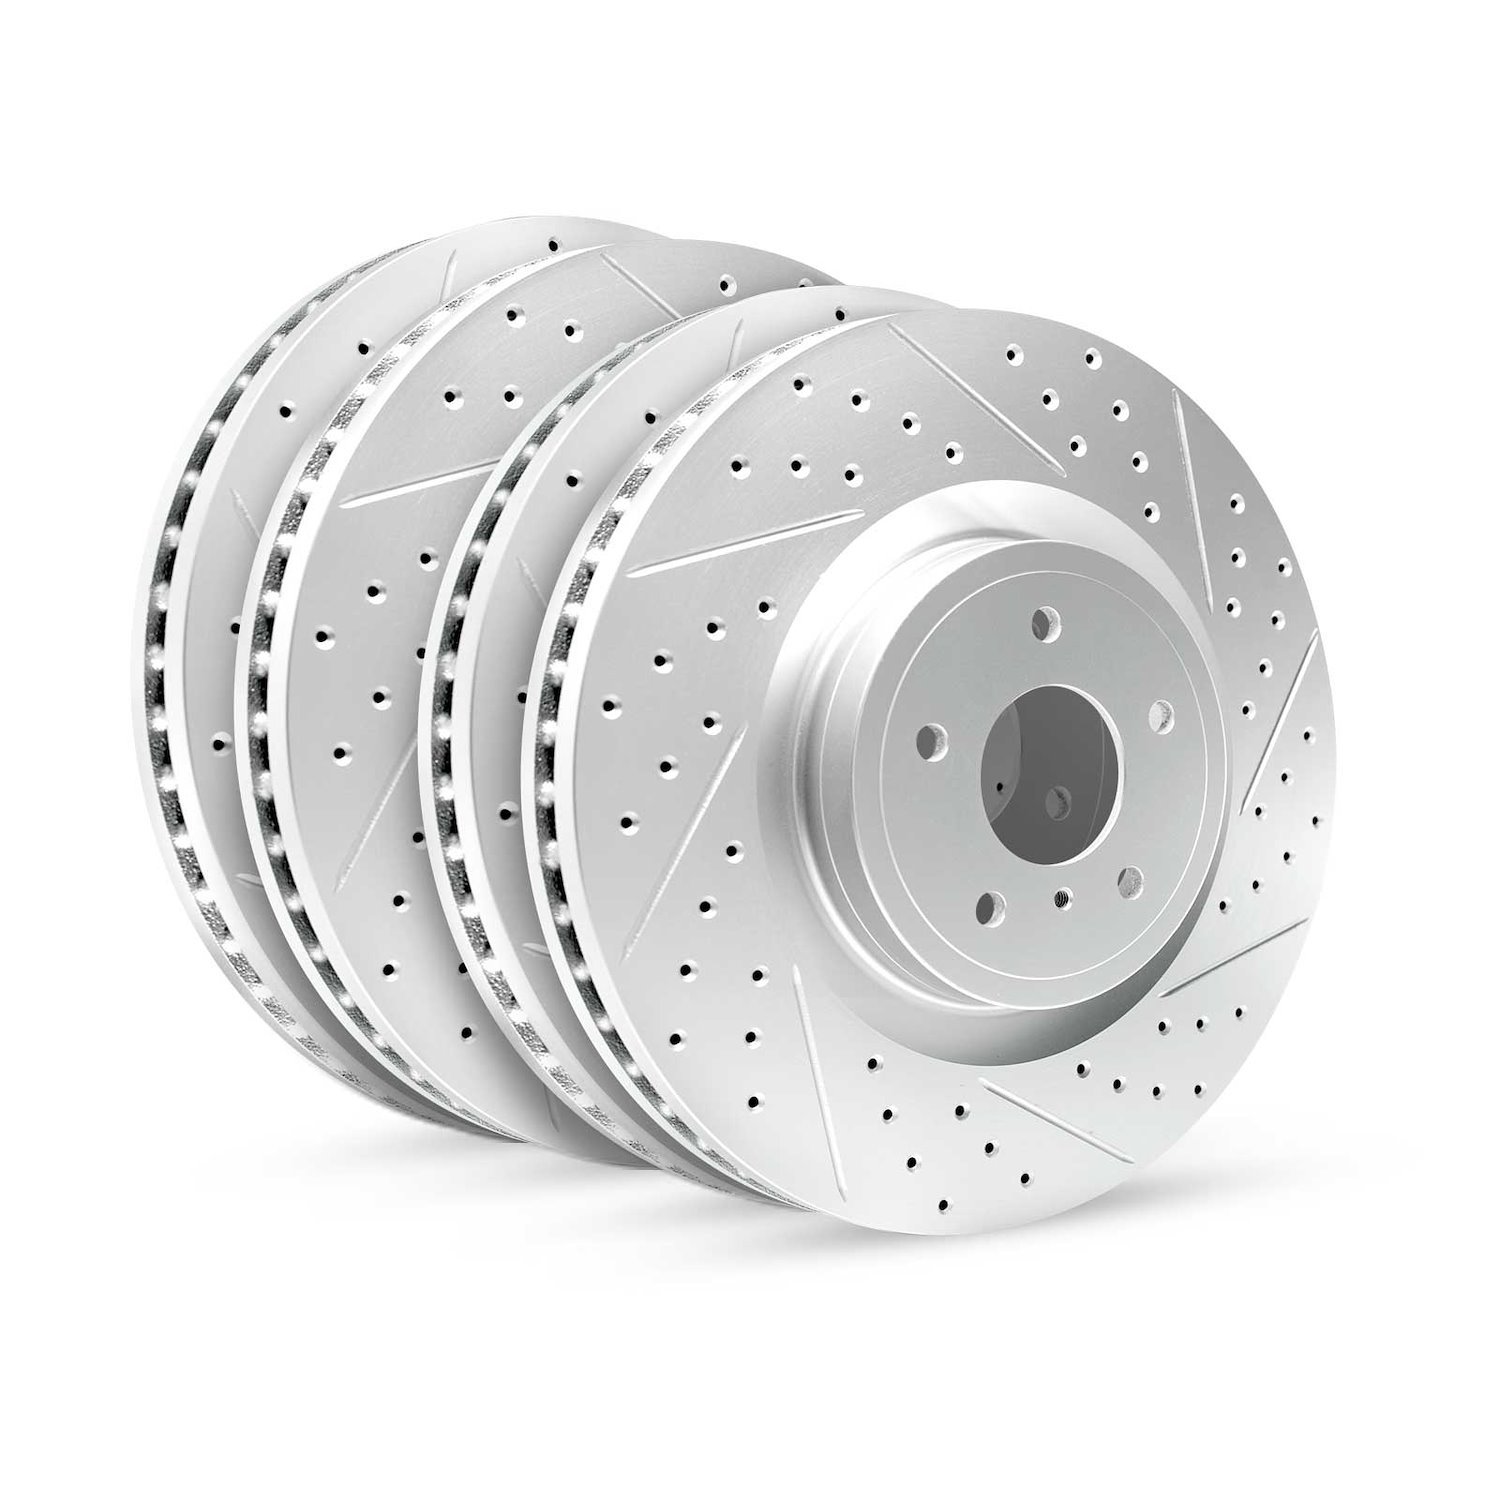 GEO-Carbon Drilled/Slotted Rotors, 1999-2015 Ford/Mazda,